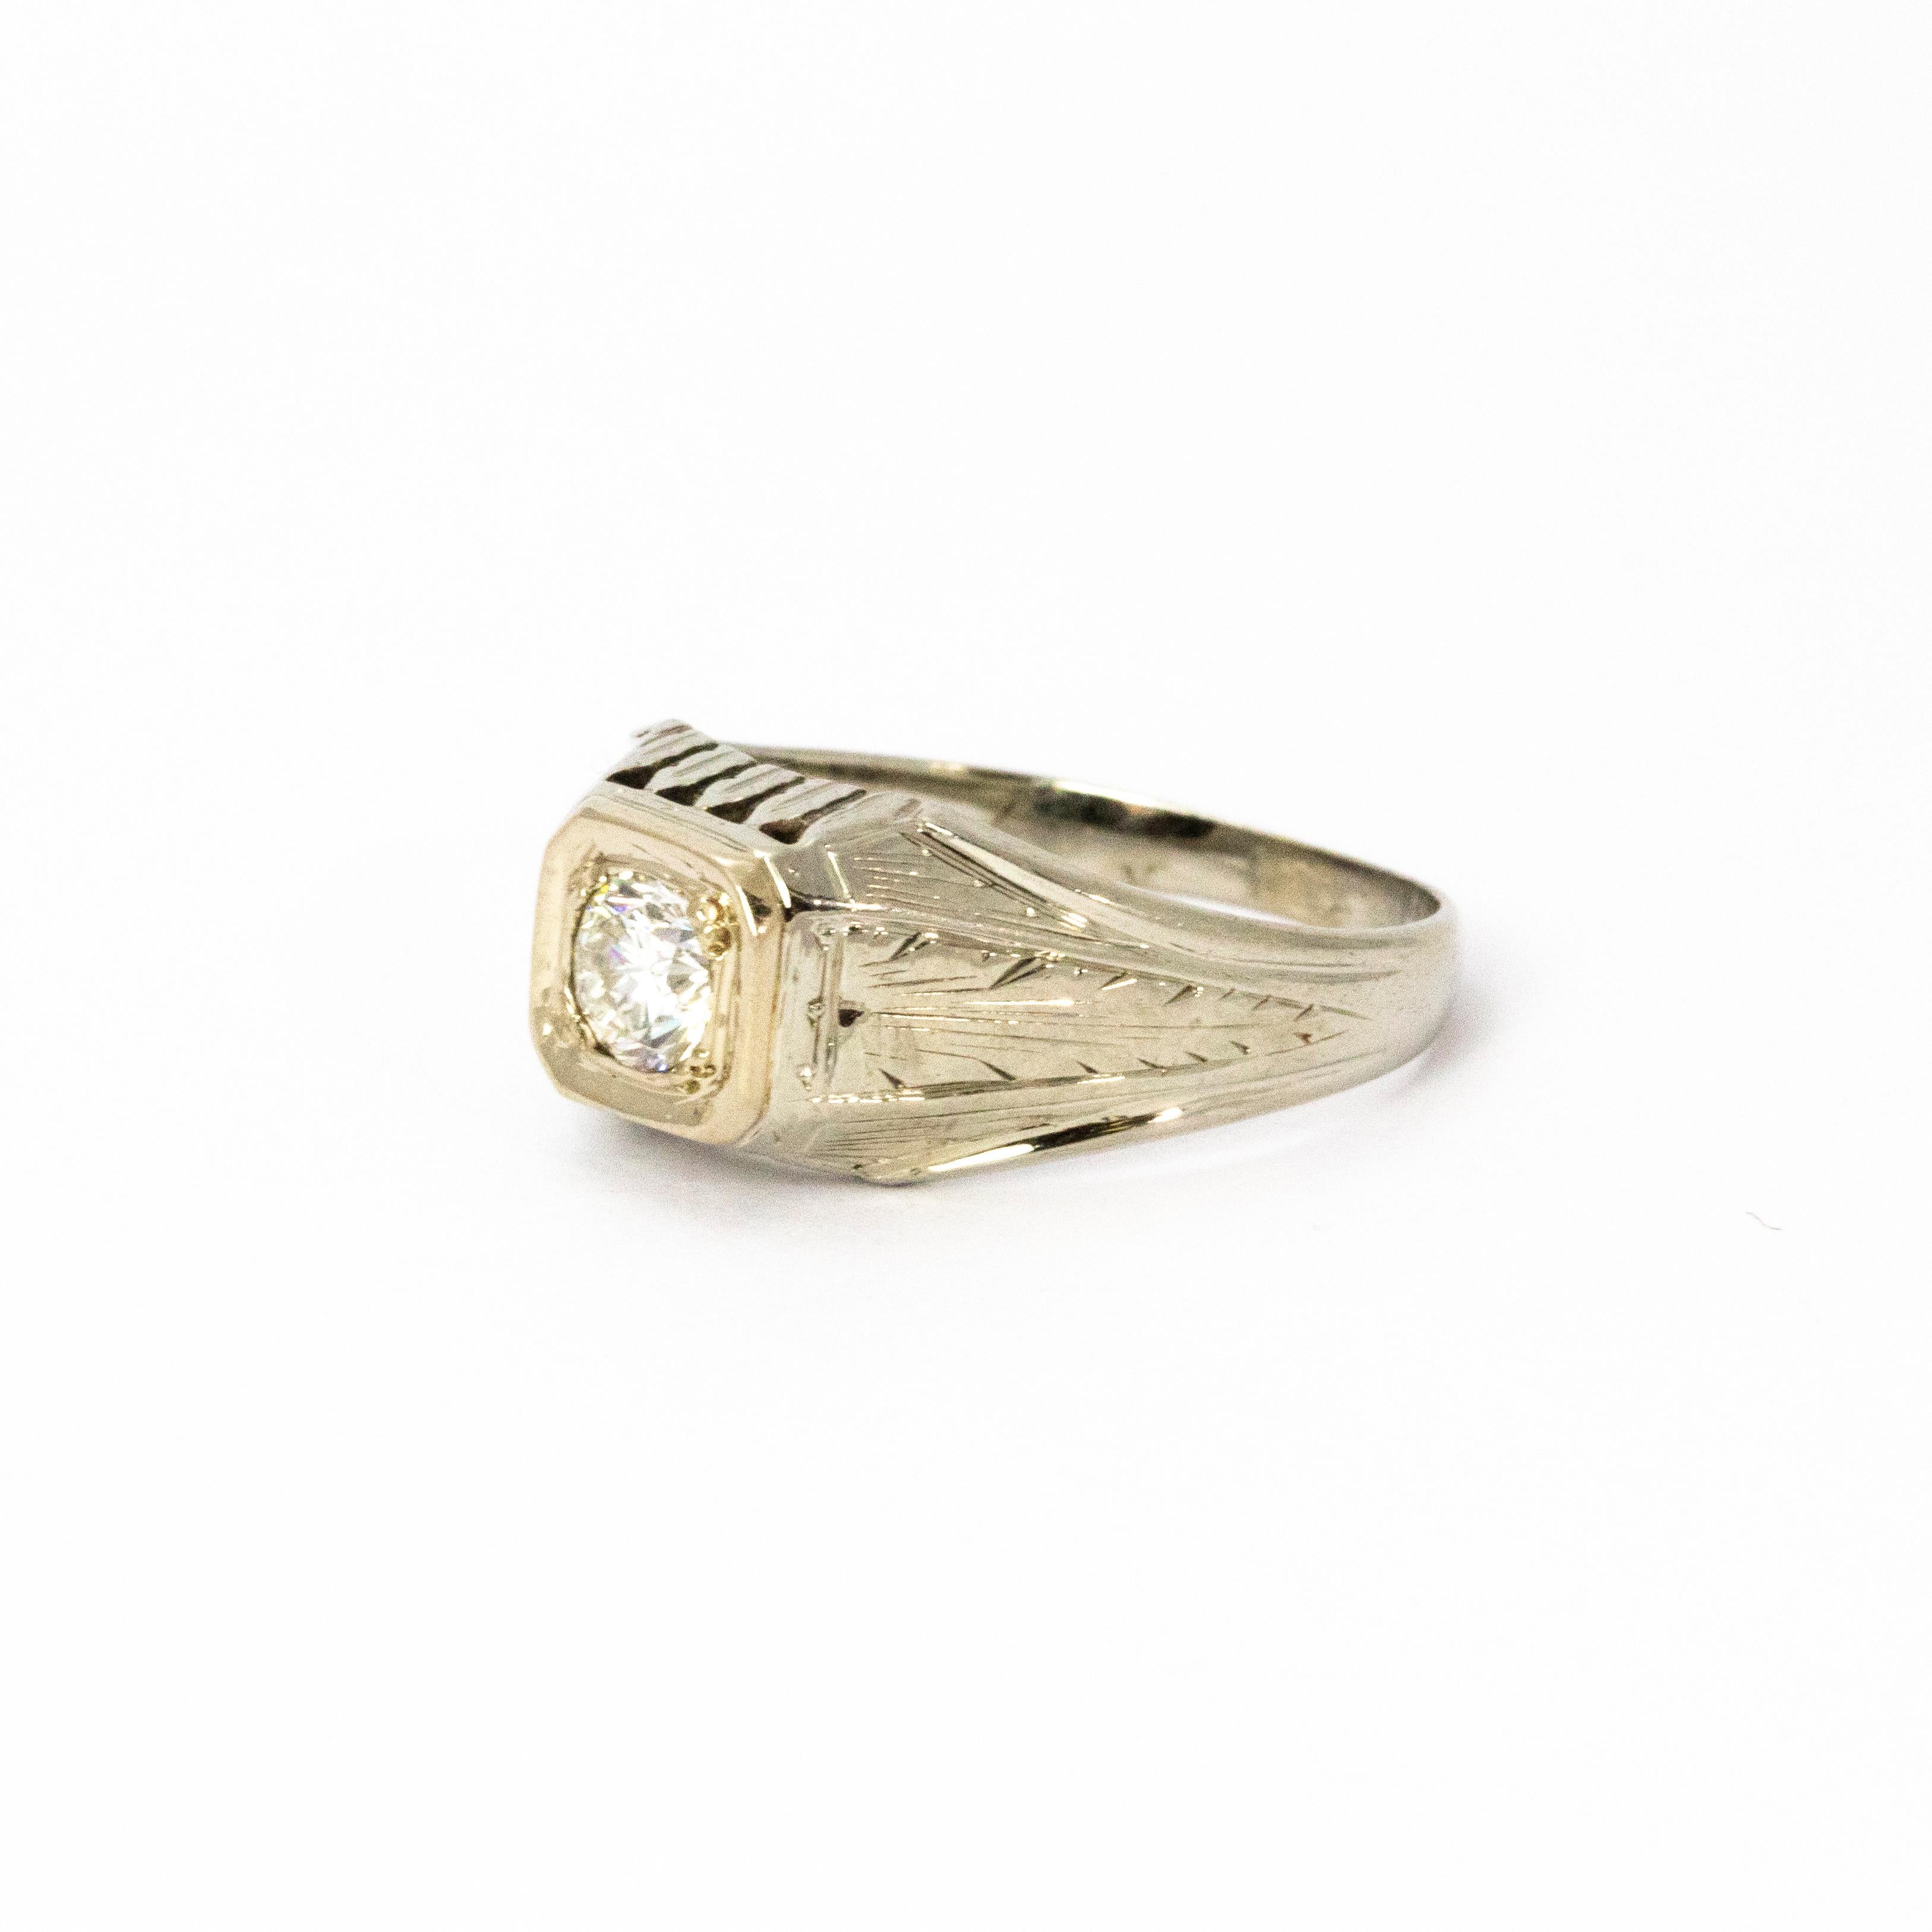 A stylish Art Deco diamond ring modelled in 18 karat white gold with square setting and pretty hand engraved shoulders. The beautiful old European cut diamond measures approximately 50 points, colour VS2.

Ring Size: P 1/2 or 8